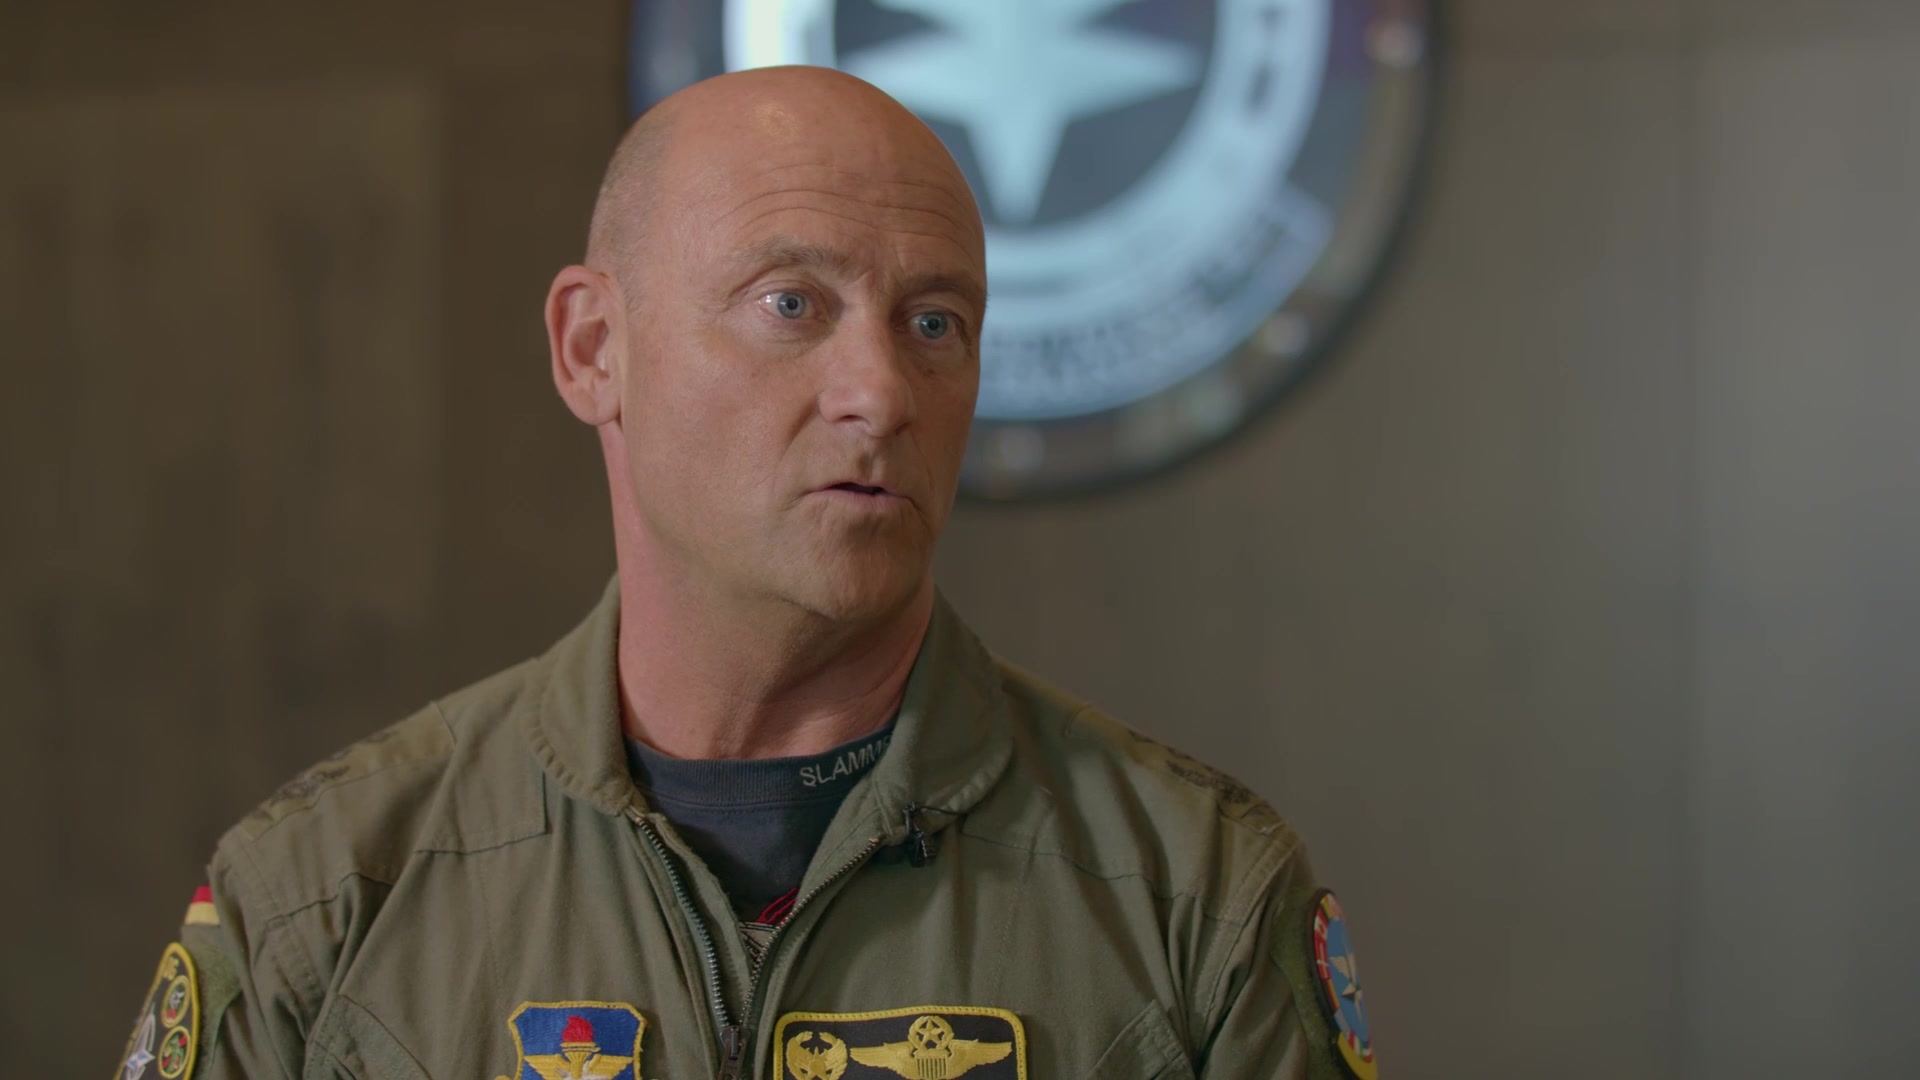 The Euro-NATO Joint Jet Pilot Training Program is a one-of-a-kind military flight school.  Col. Stefan Kleinheyer, the 80th Operations Group Commander, talks about what the program is and why it is necessary.